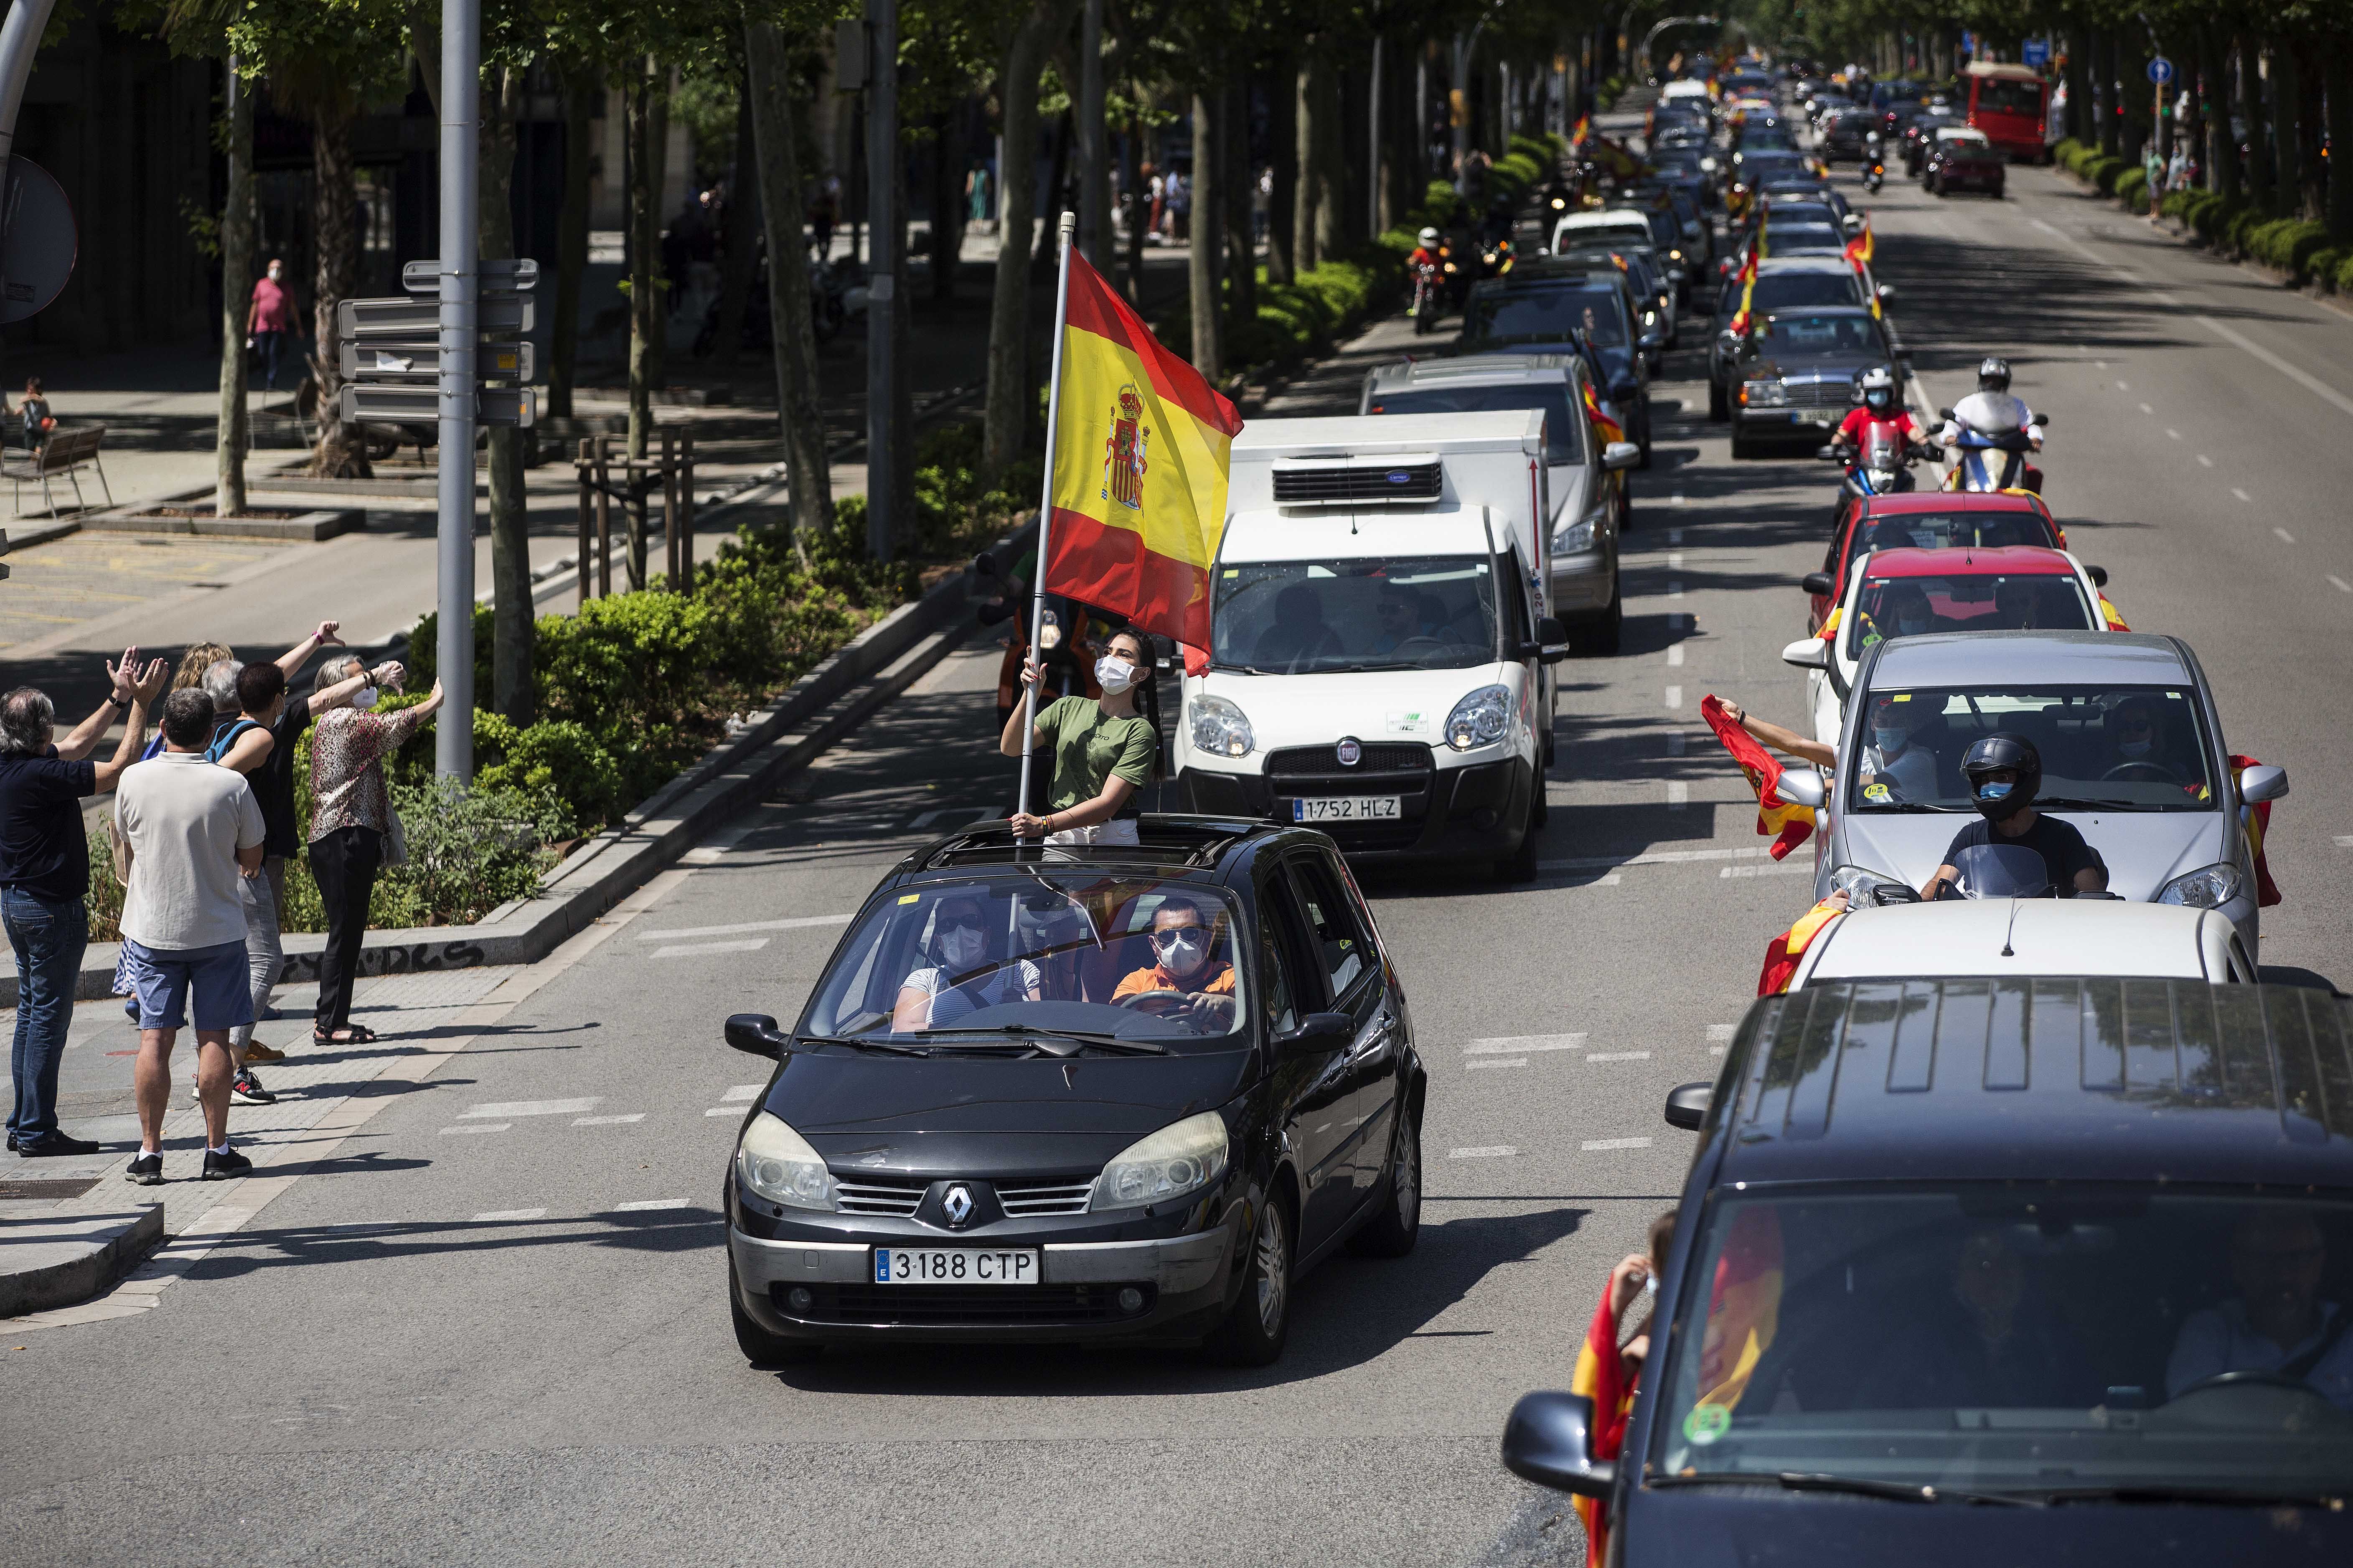 In this image, two lines of cars are on a road and several have people holding flags